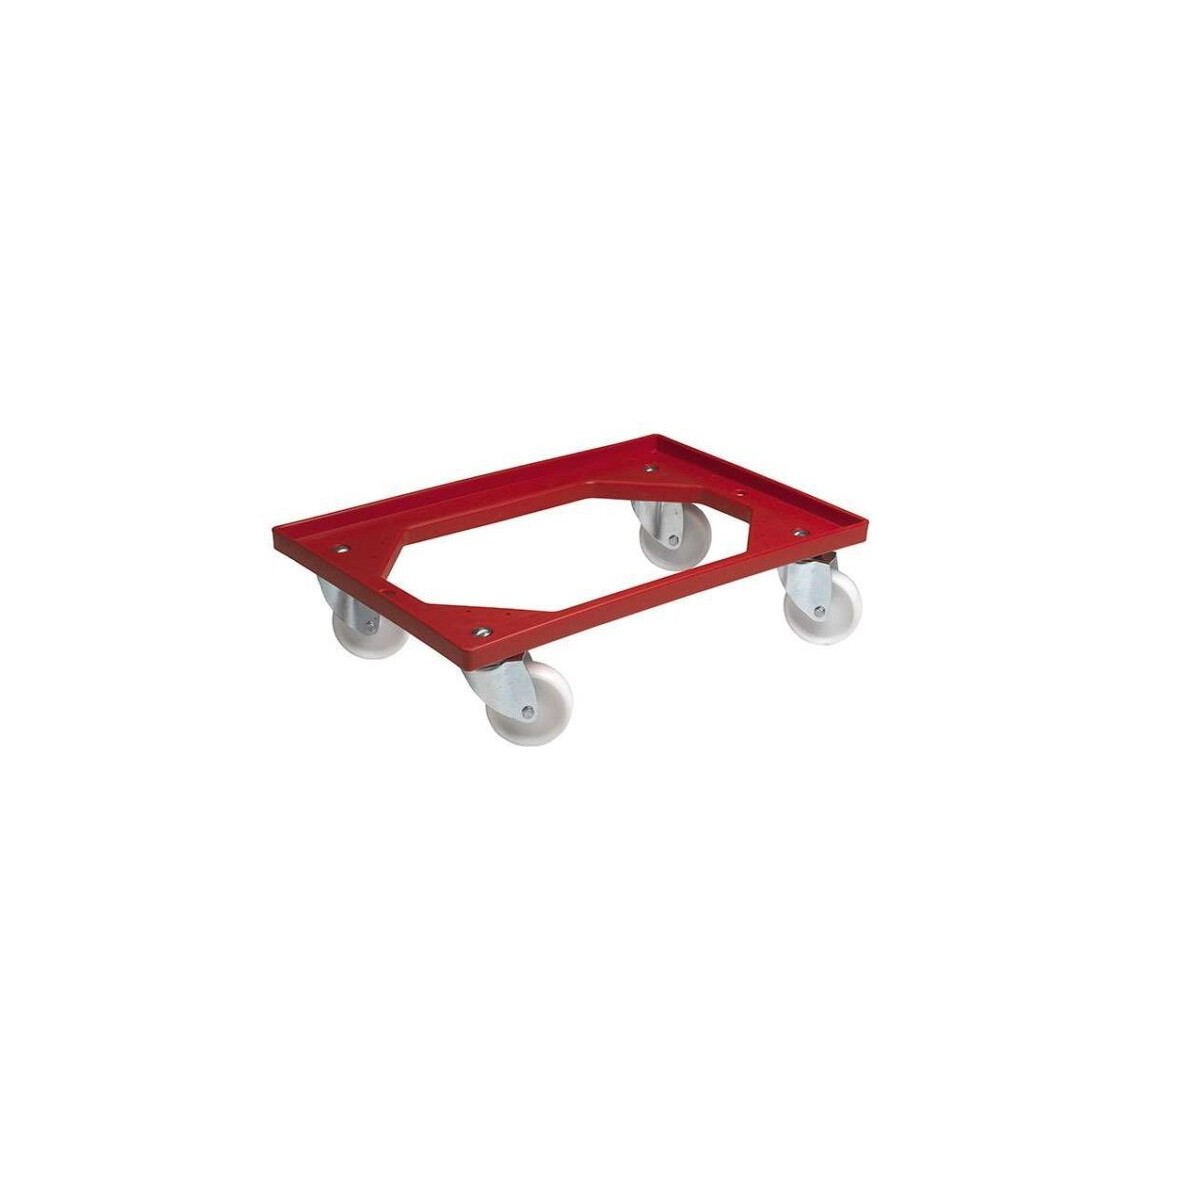 CHARIOT DOLLY ROUGE 60X40 ROUES POLYAMIDESFOURCHE GALVA